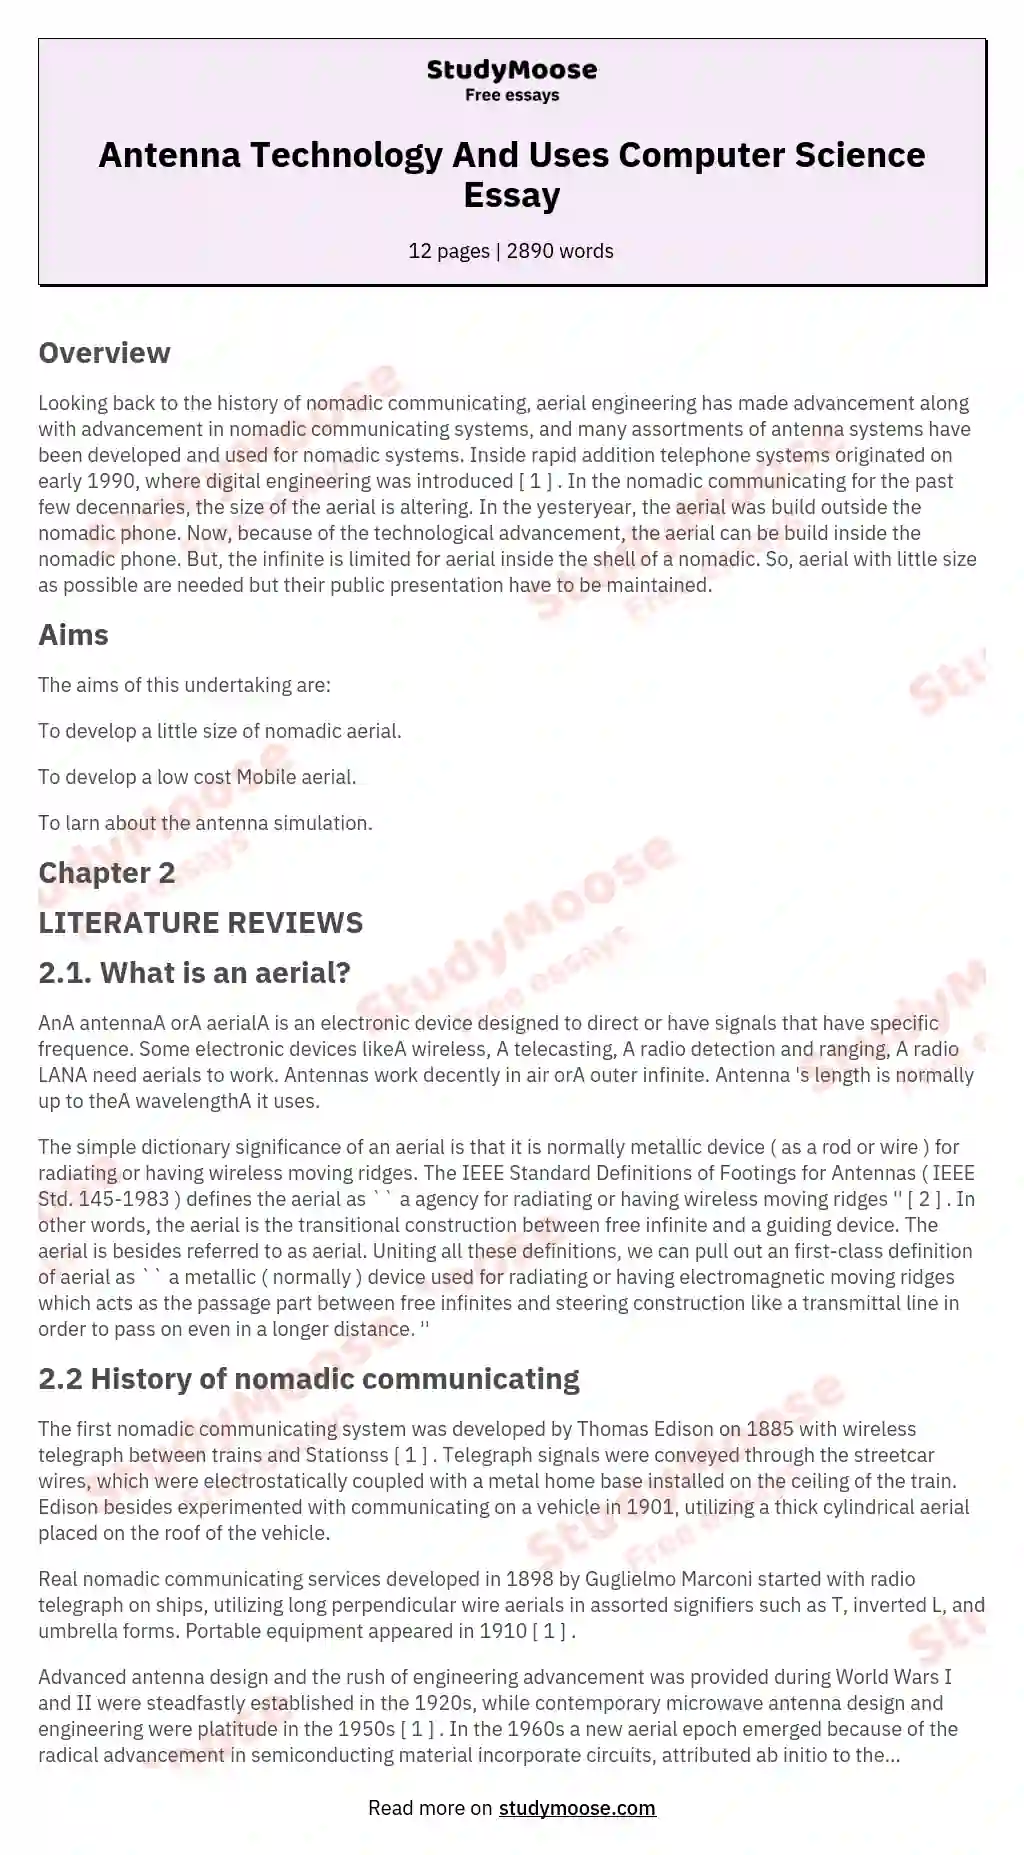 Antenna Technology And Uses Computer Science Essay essay